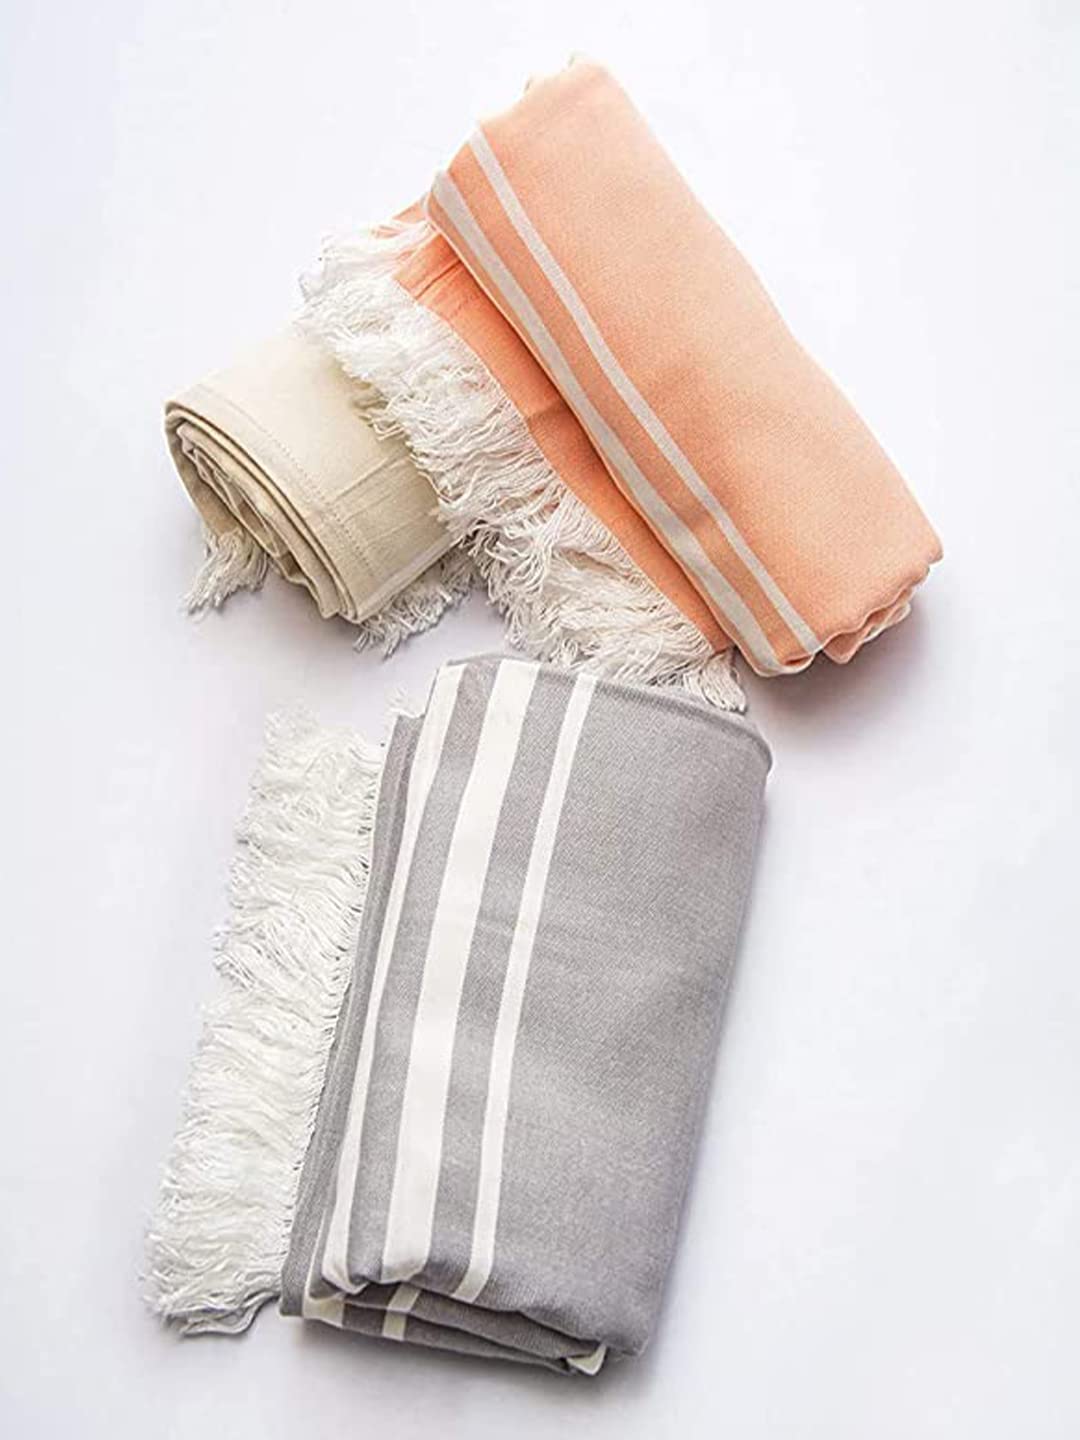 Mush 100% Bamboo Light Weight & Ultra-Compact Turkish Towel Super Soft, Absorbent, Quick Dry, Anti-Odor Bamboo Towel for Bath, Travel, Gym, Swim and Workout (4, Grey, Peach, Light Green & Dark Green)